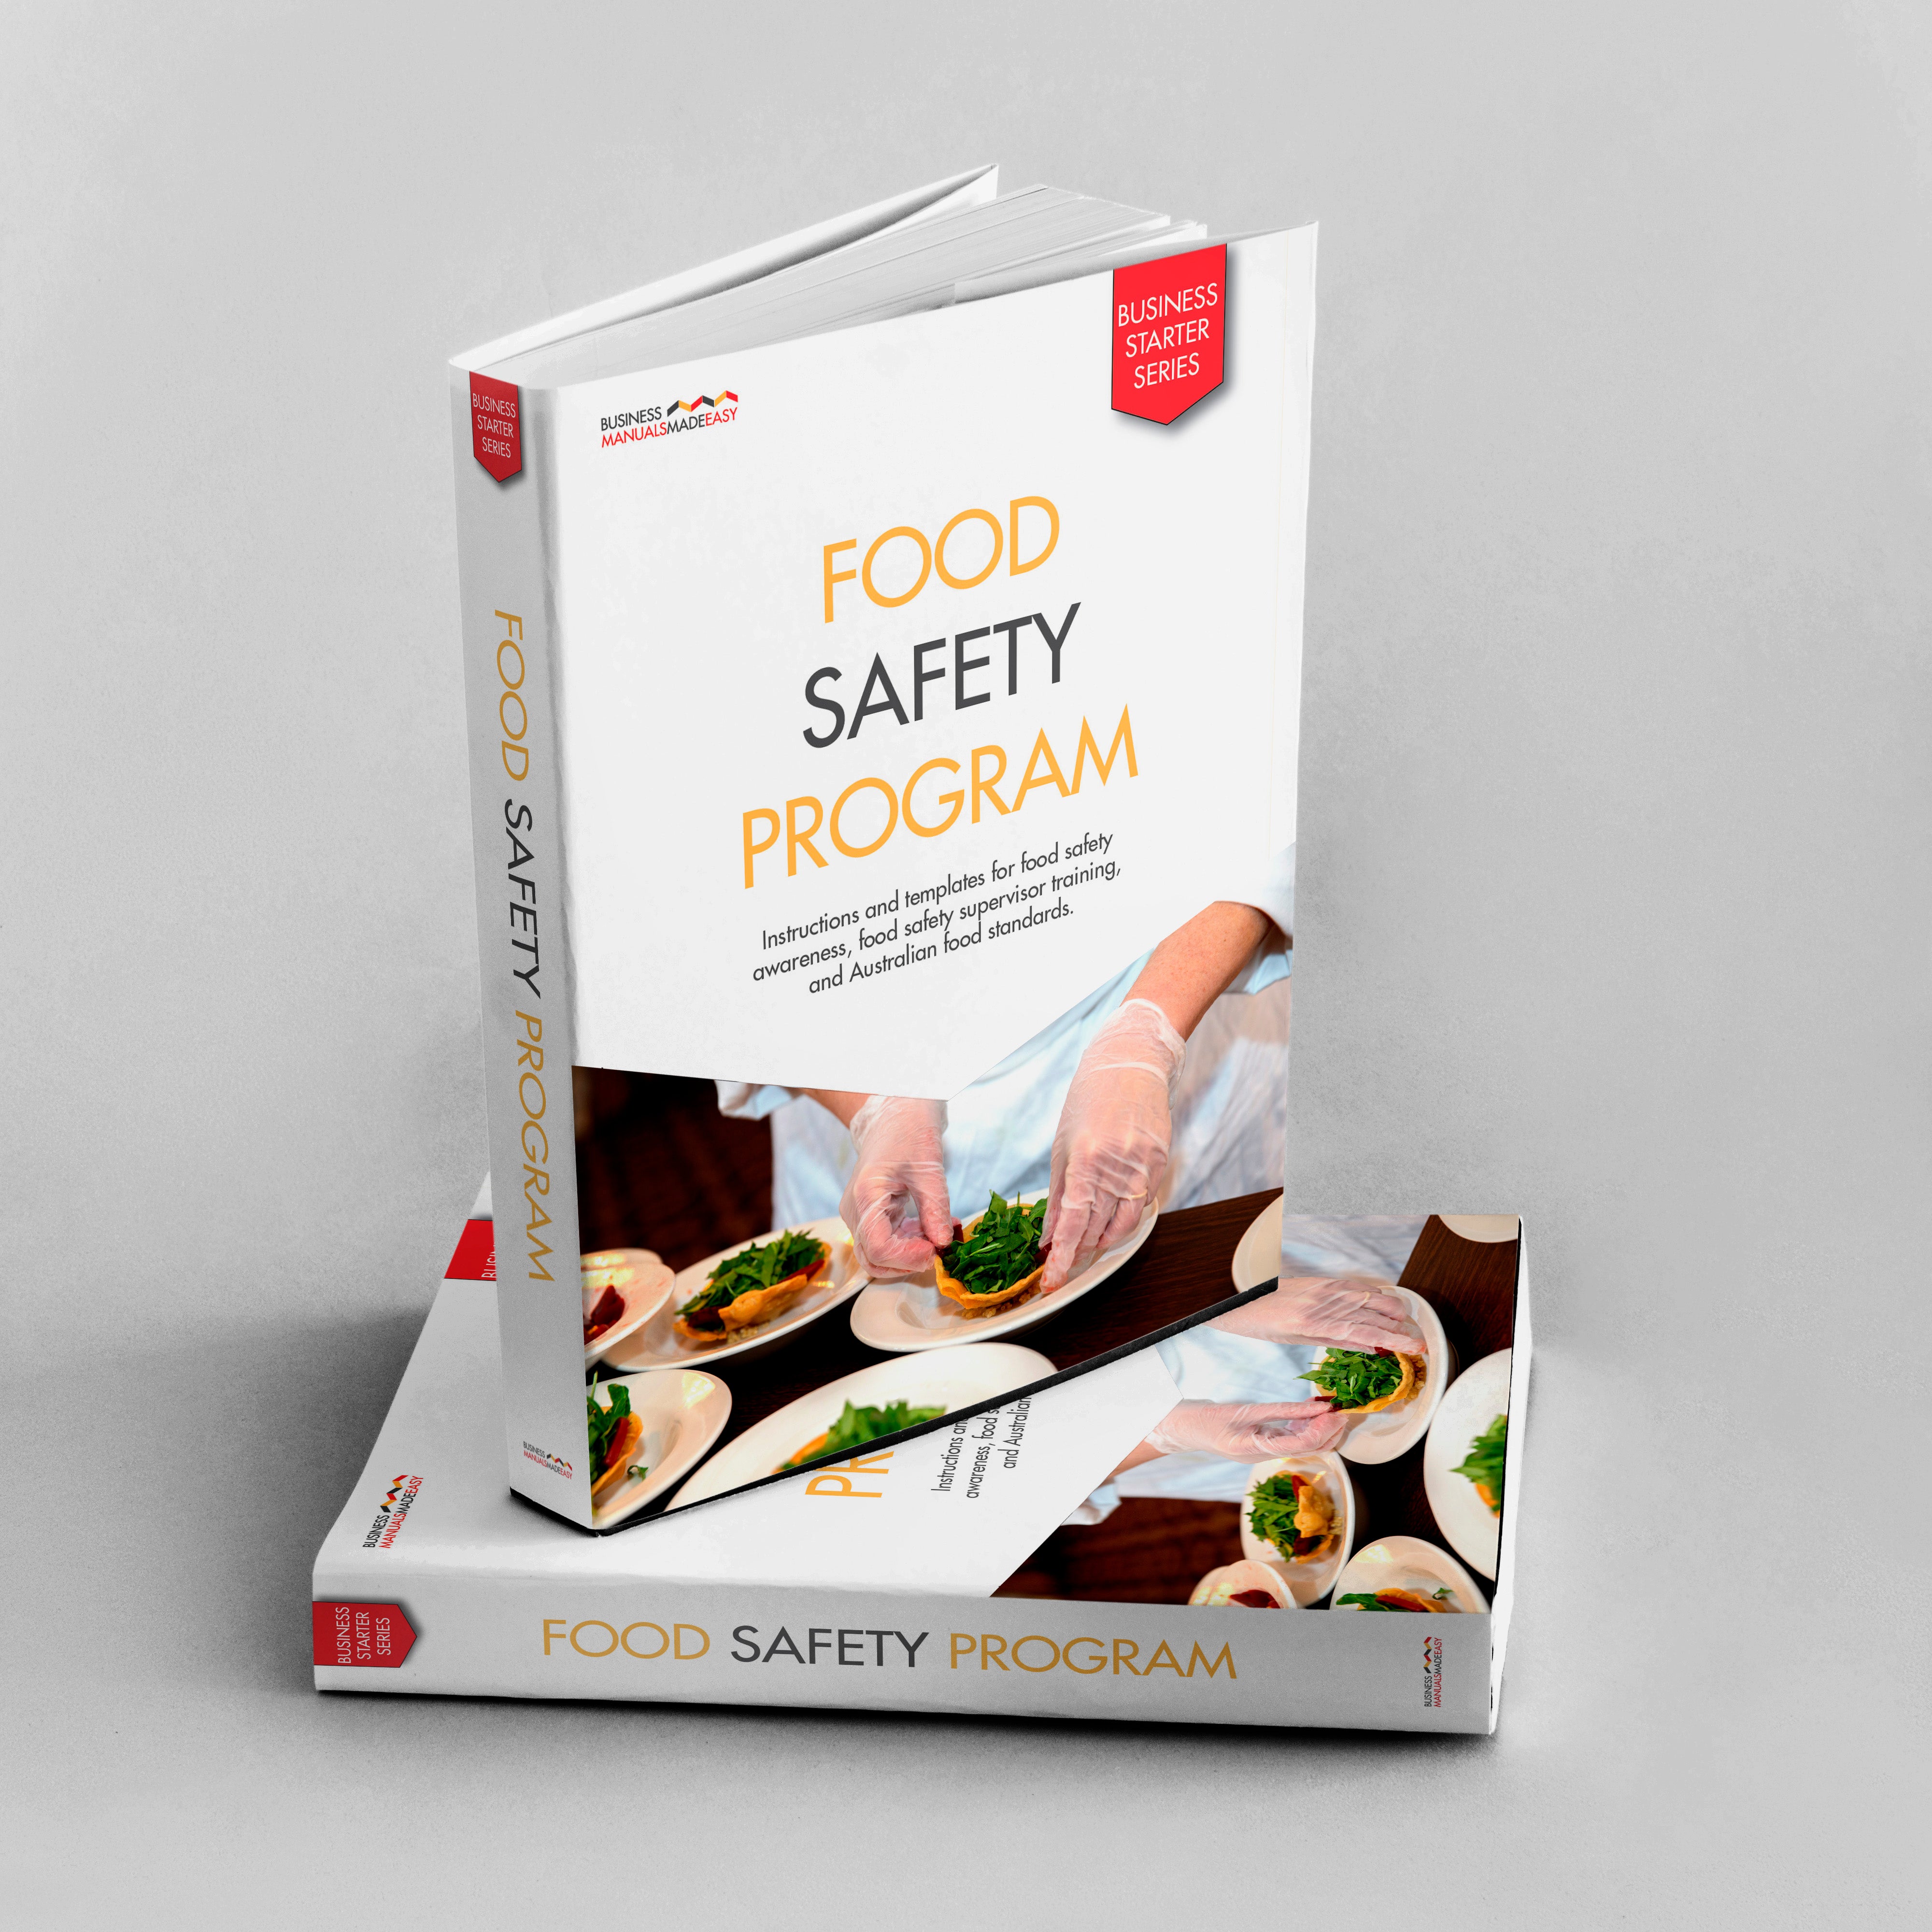 Business Manuals Made Easy - Food Safety Program - Helps food service operators meet food safety regulations.